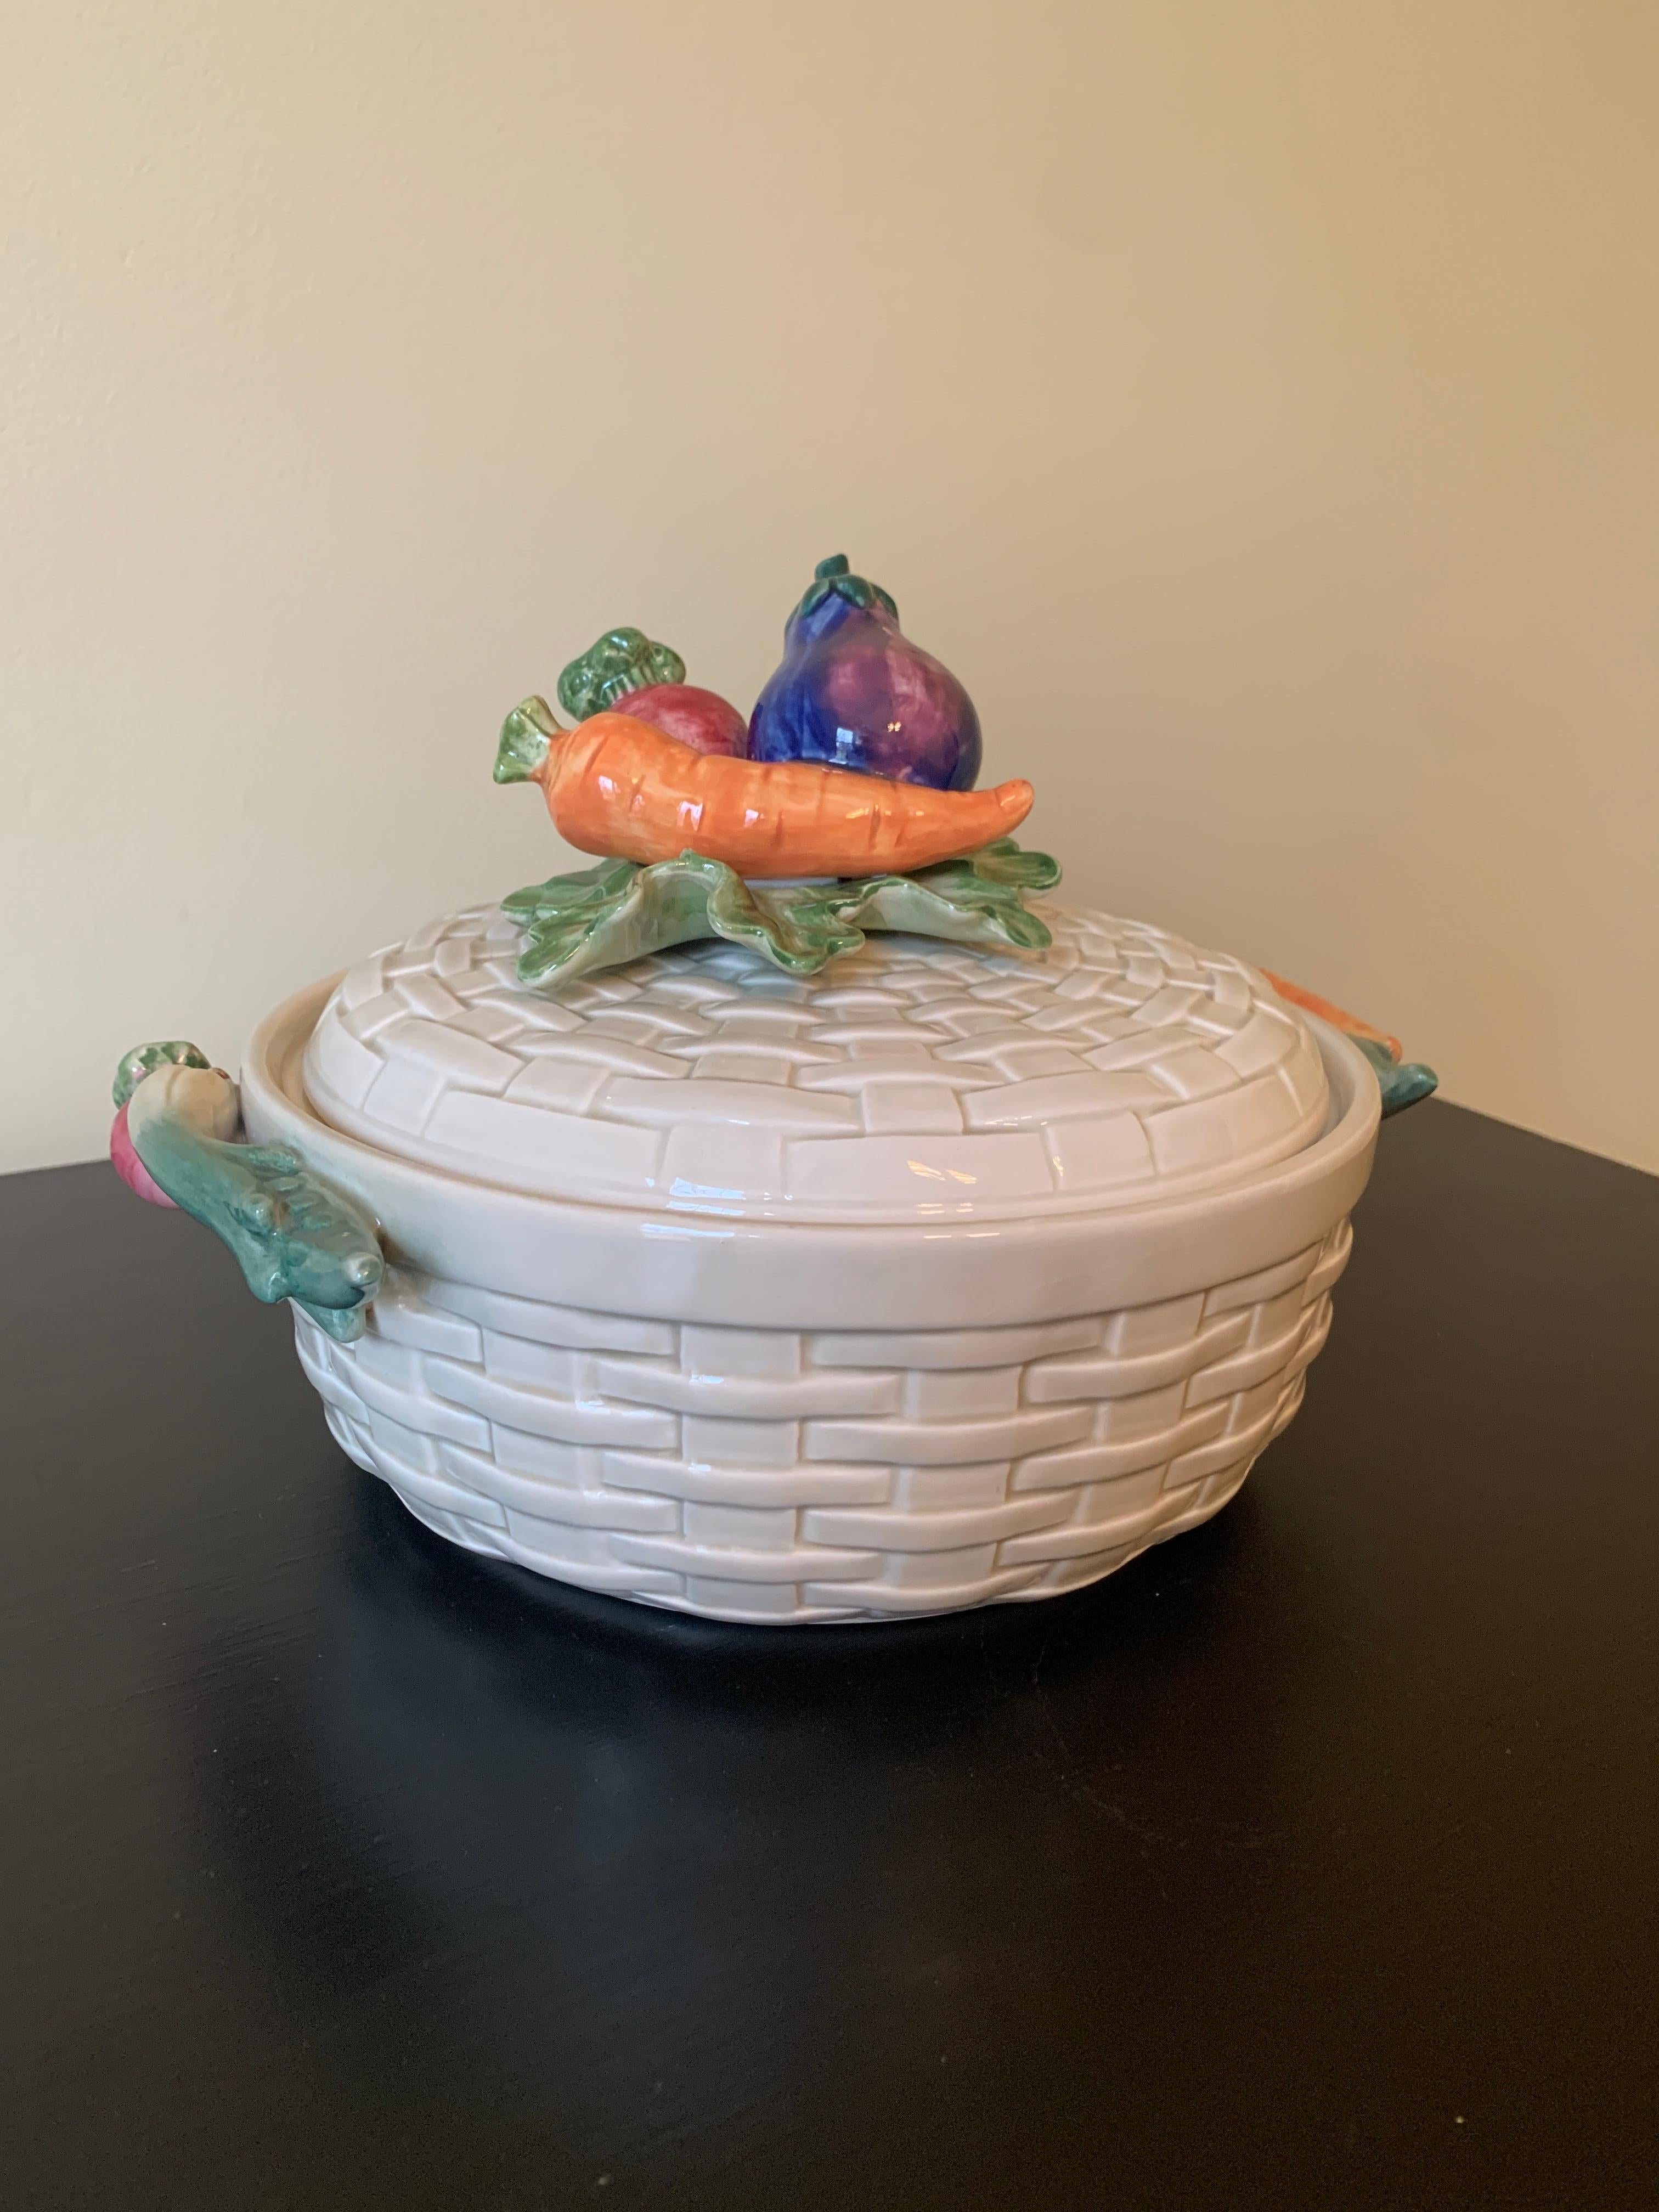 Fitz & Floyd Glazed Ceramic Trompe l'Oeil Woven Basket With Vegetables Casserole In Good Condition For Sale In Elkhart, IN